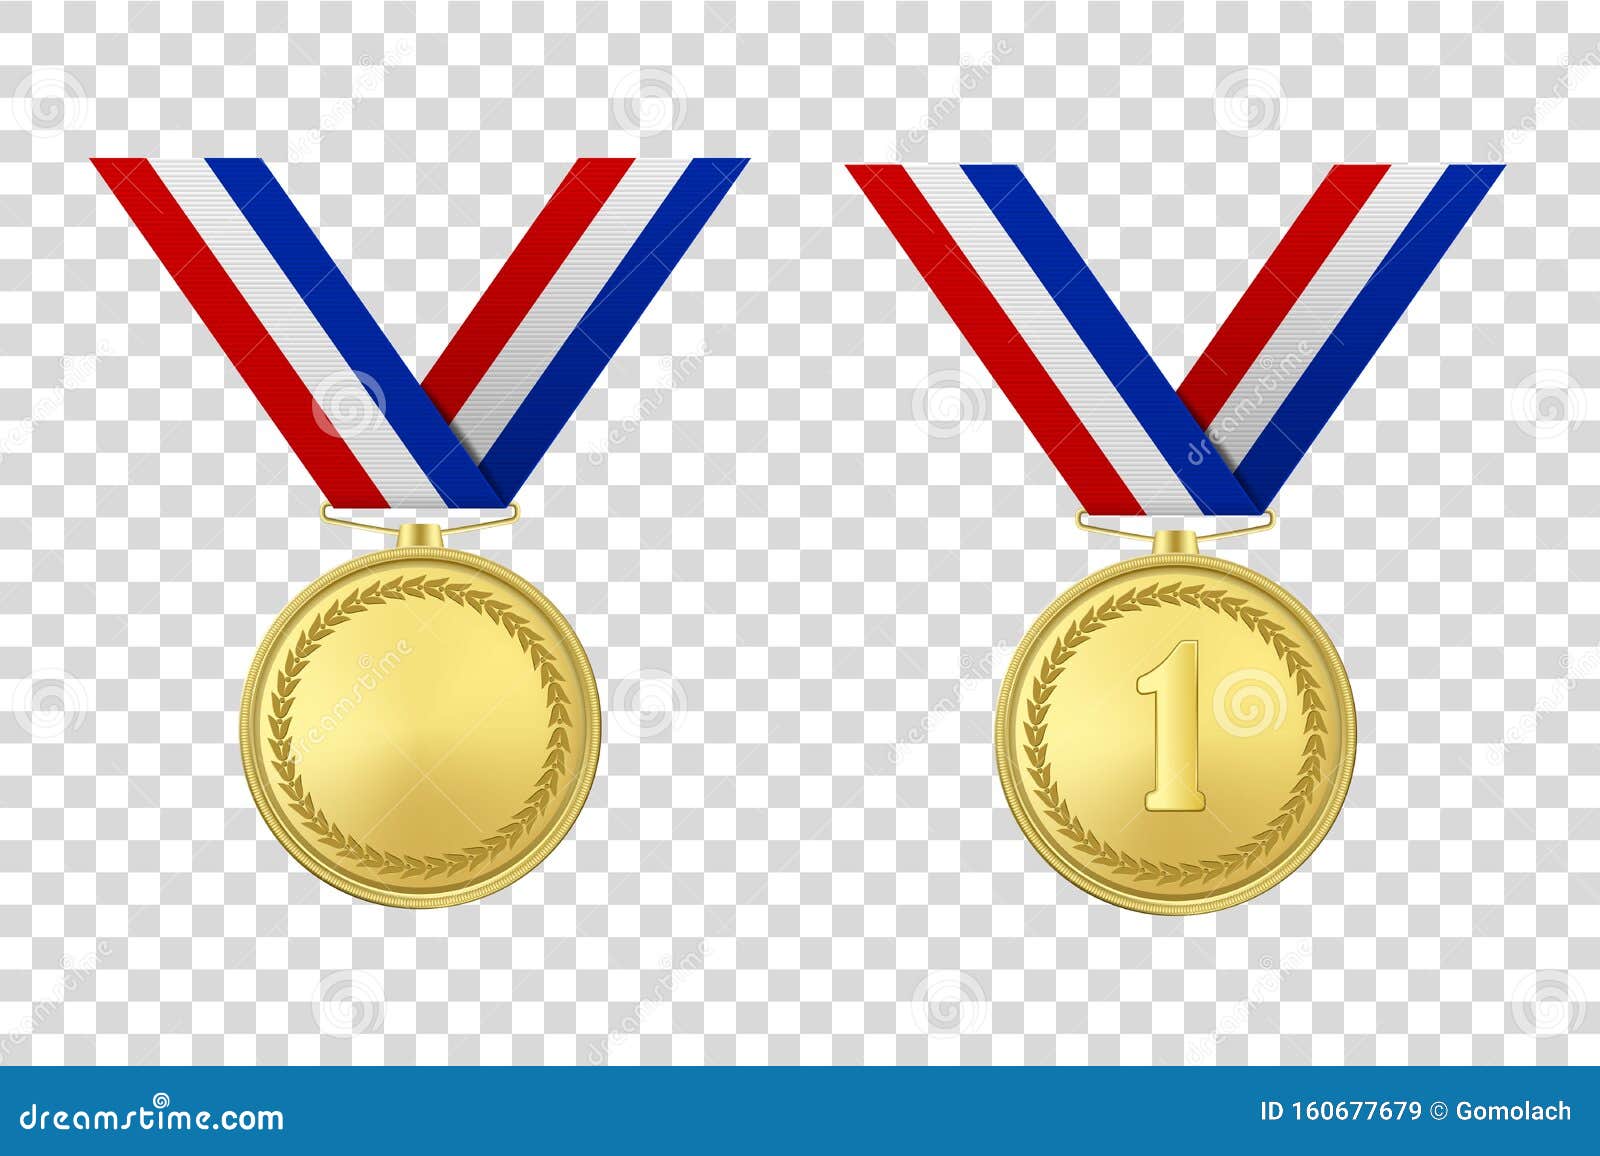 Download Vector 3d Realistic Gold Award Medal Icon Set With Color ...